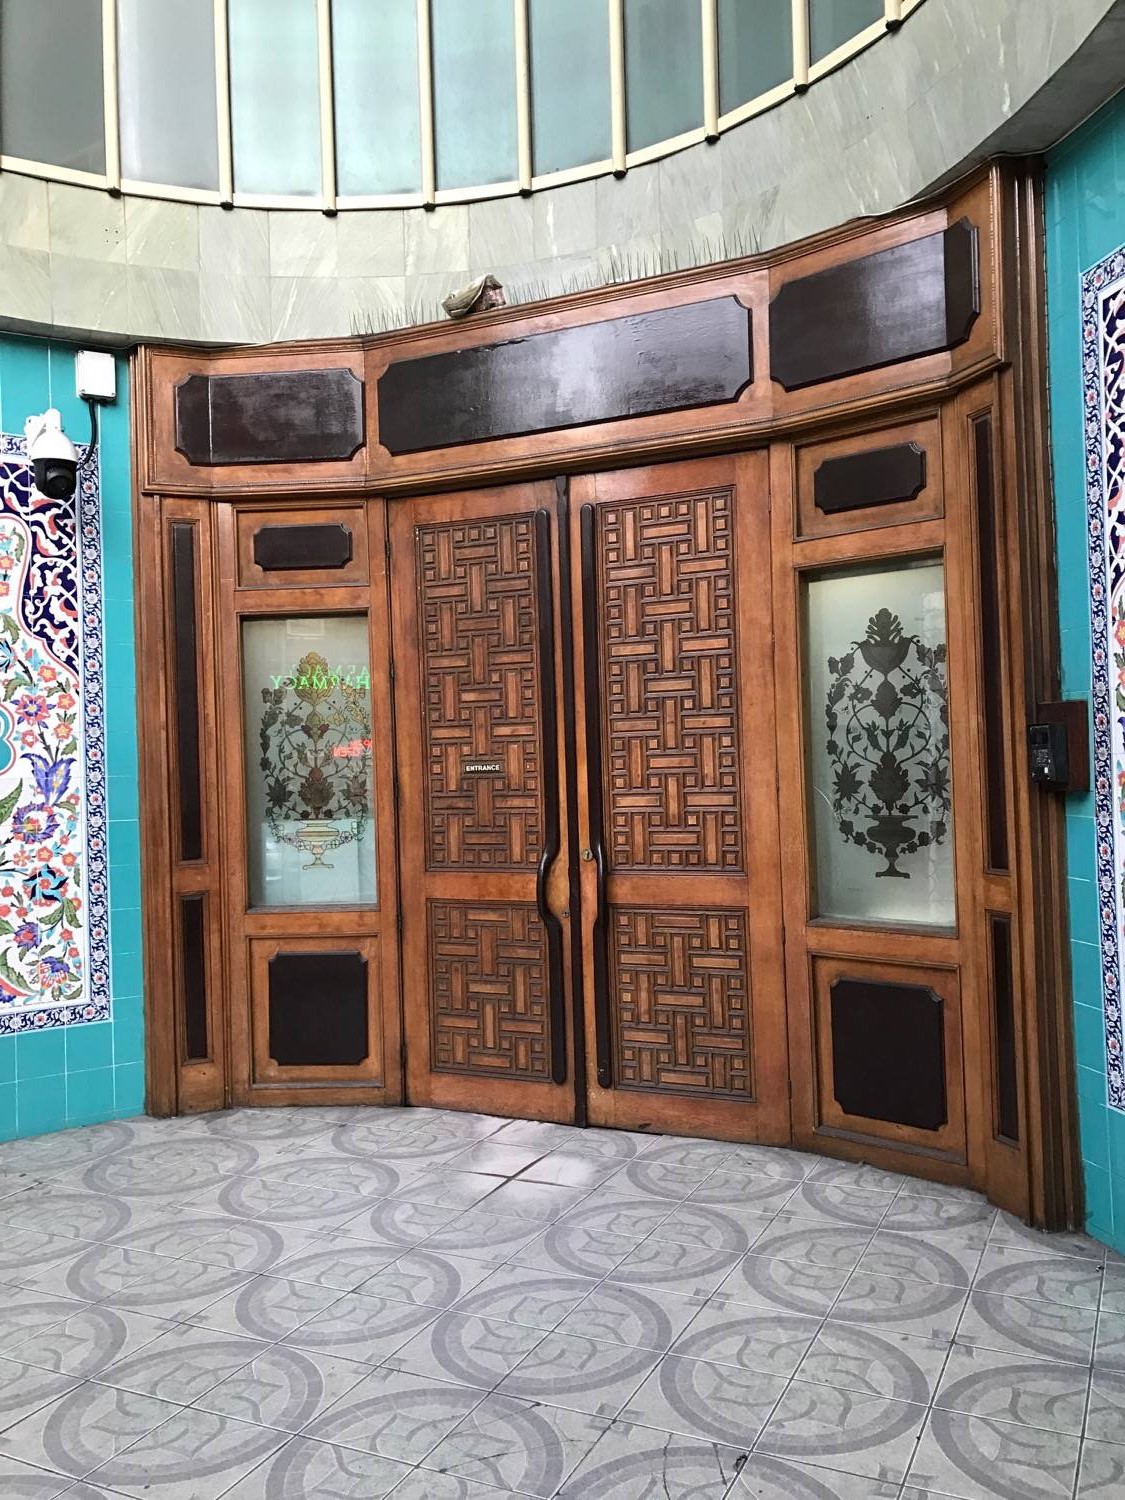 View of the carved wood doors and etched glass windows of the main entrance